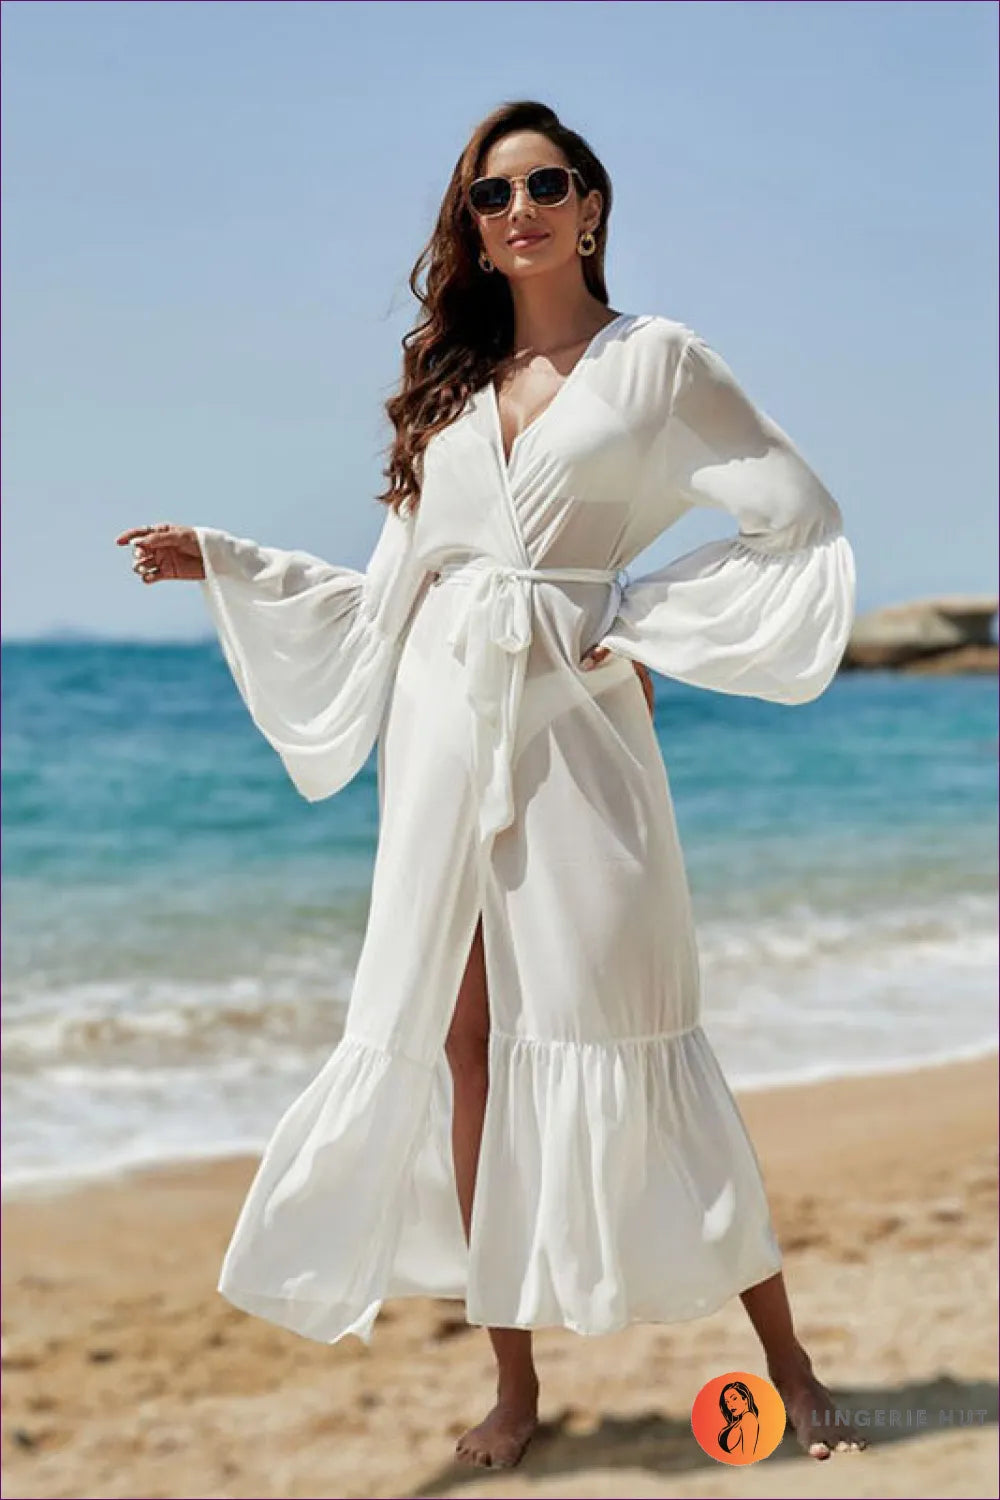 Elevate Your Vacation Style With Our Boho-chic Chiffon Bell Sleeve Cardigan. Complete Beach Look For Stylish